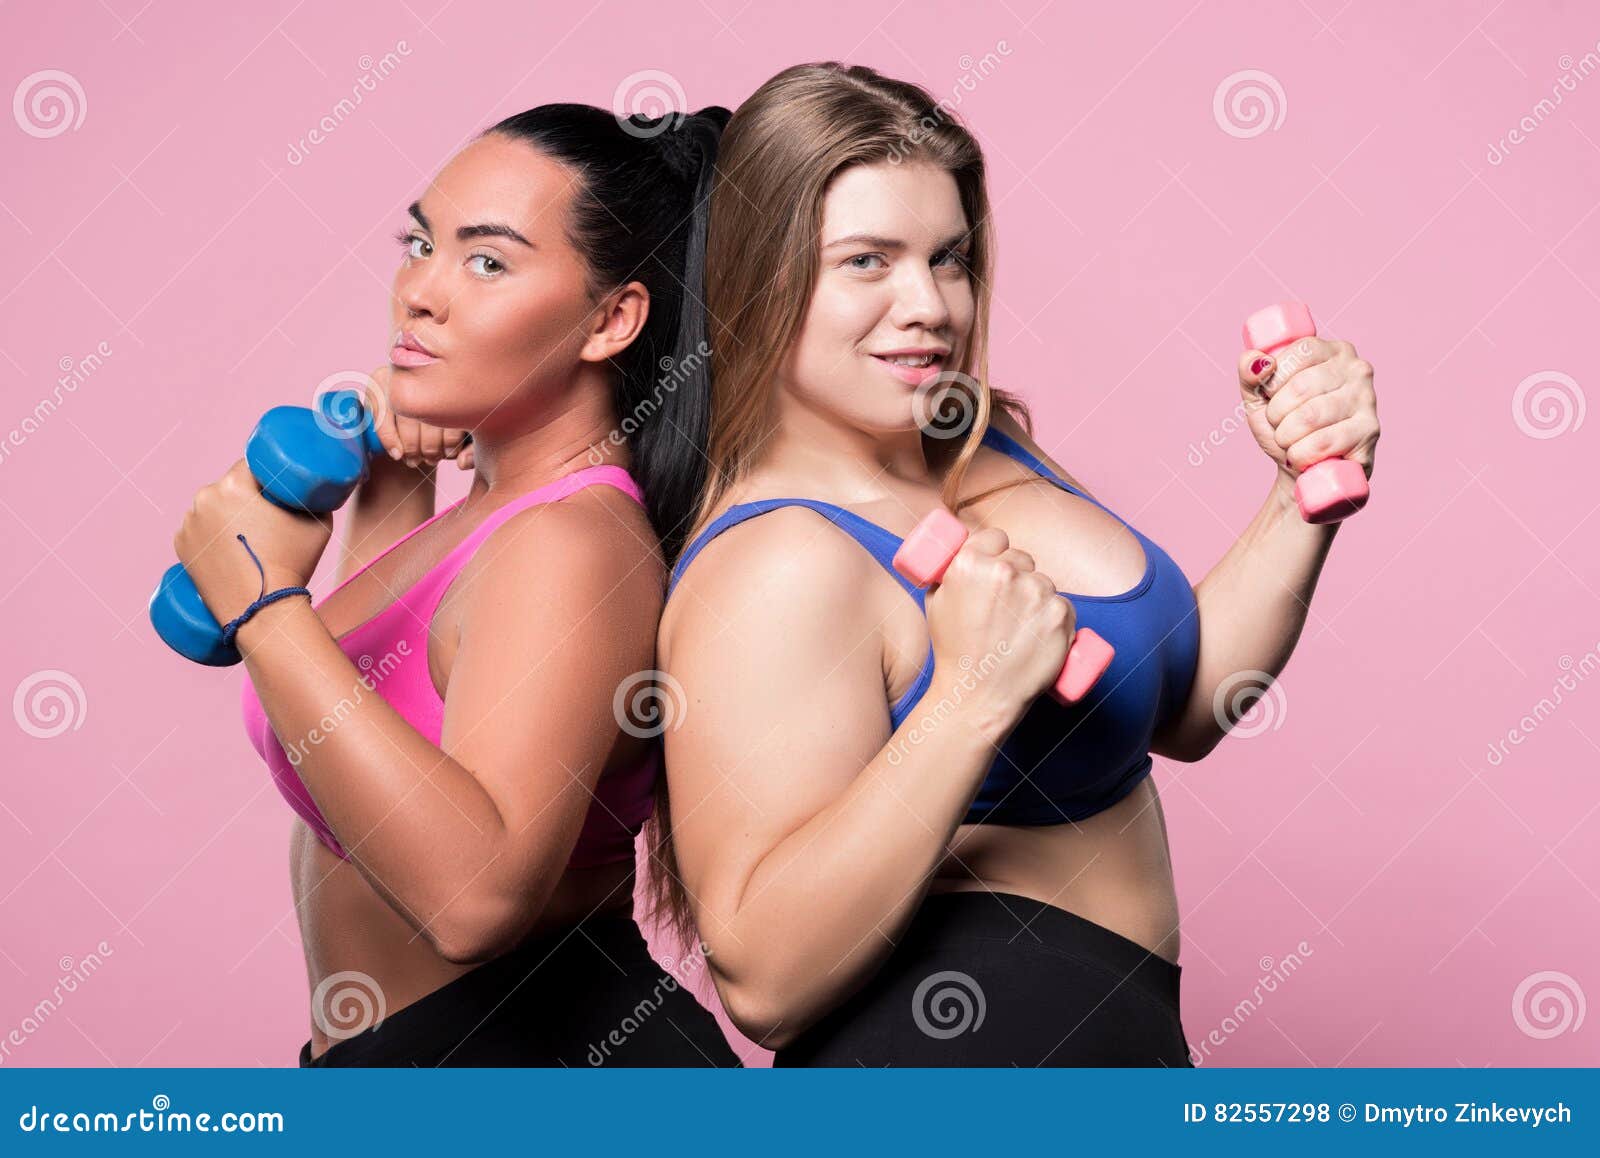 583 Bra Fat Exercises Home Royalty-Free Images, Stock Photos & Pictures